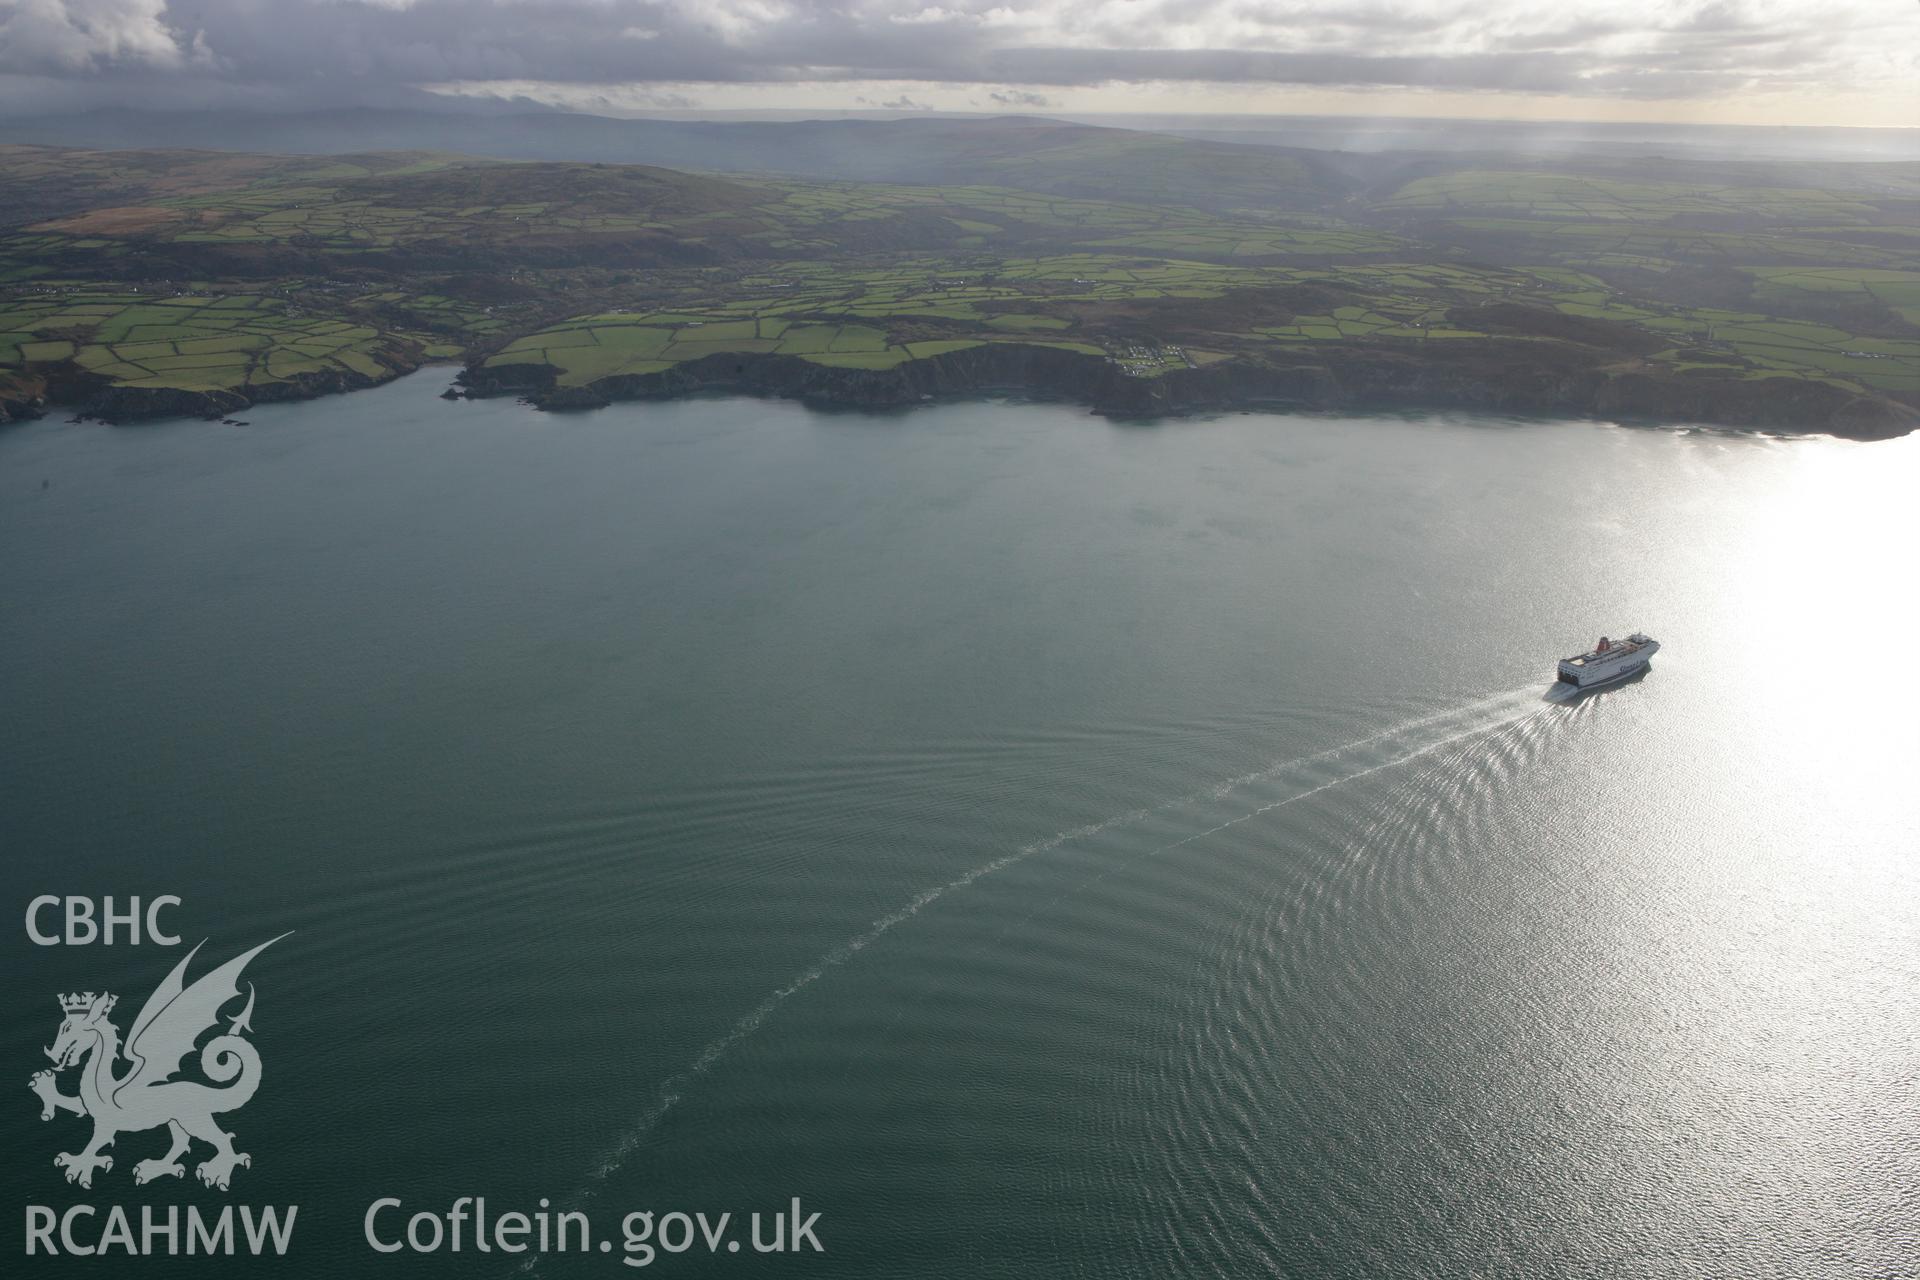 RCAHMW colour oblique photograph of ferry heading towards Fishguard Harbour. Taken by Toby Driver on 16/11/2010.